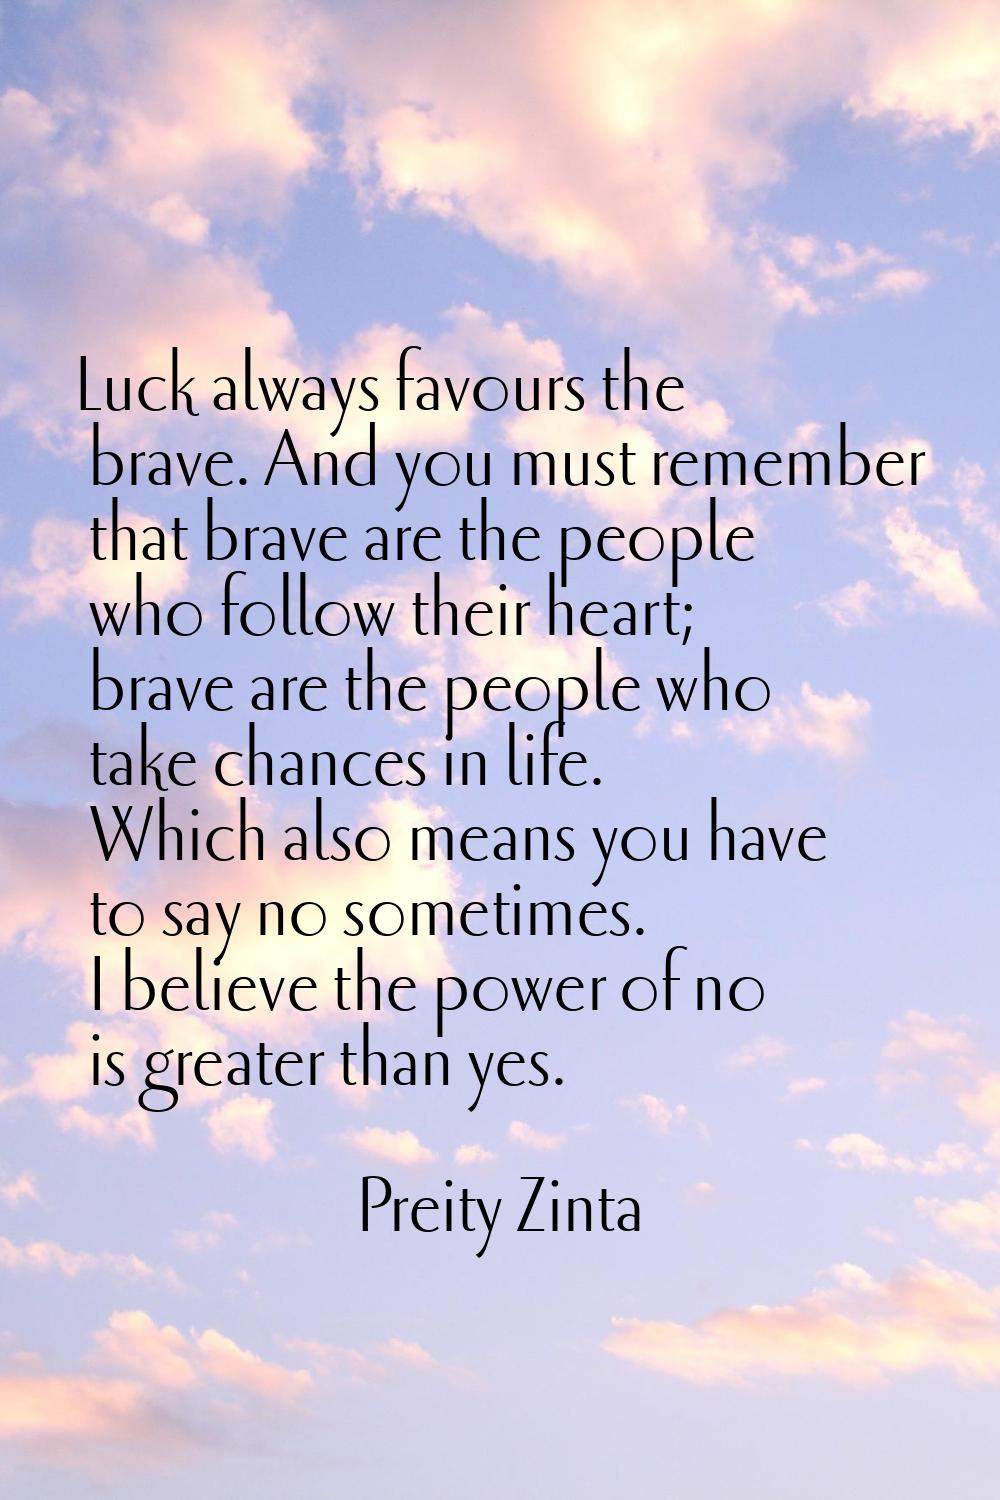 Luck always favours the brave. And you must remember that brave are the people who follow their hea